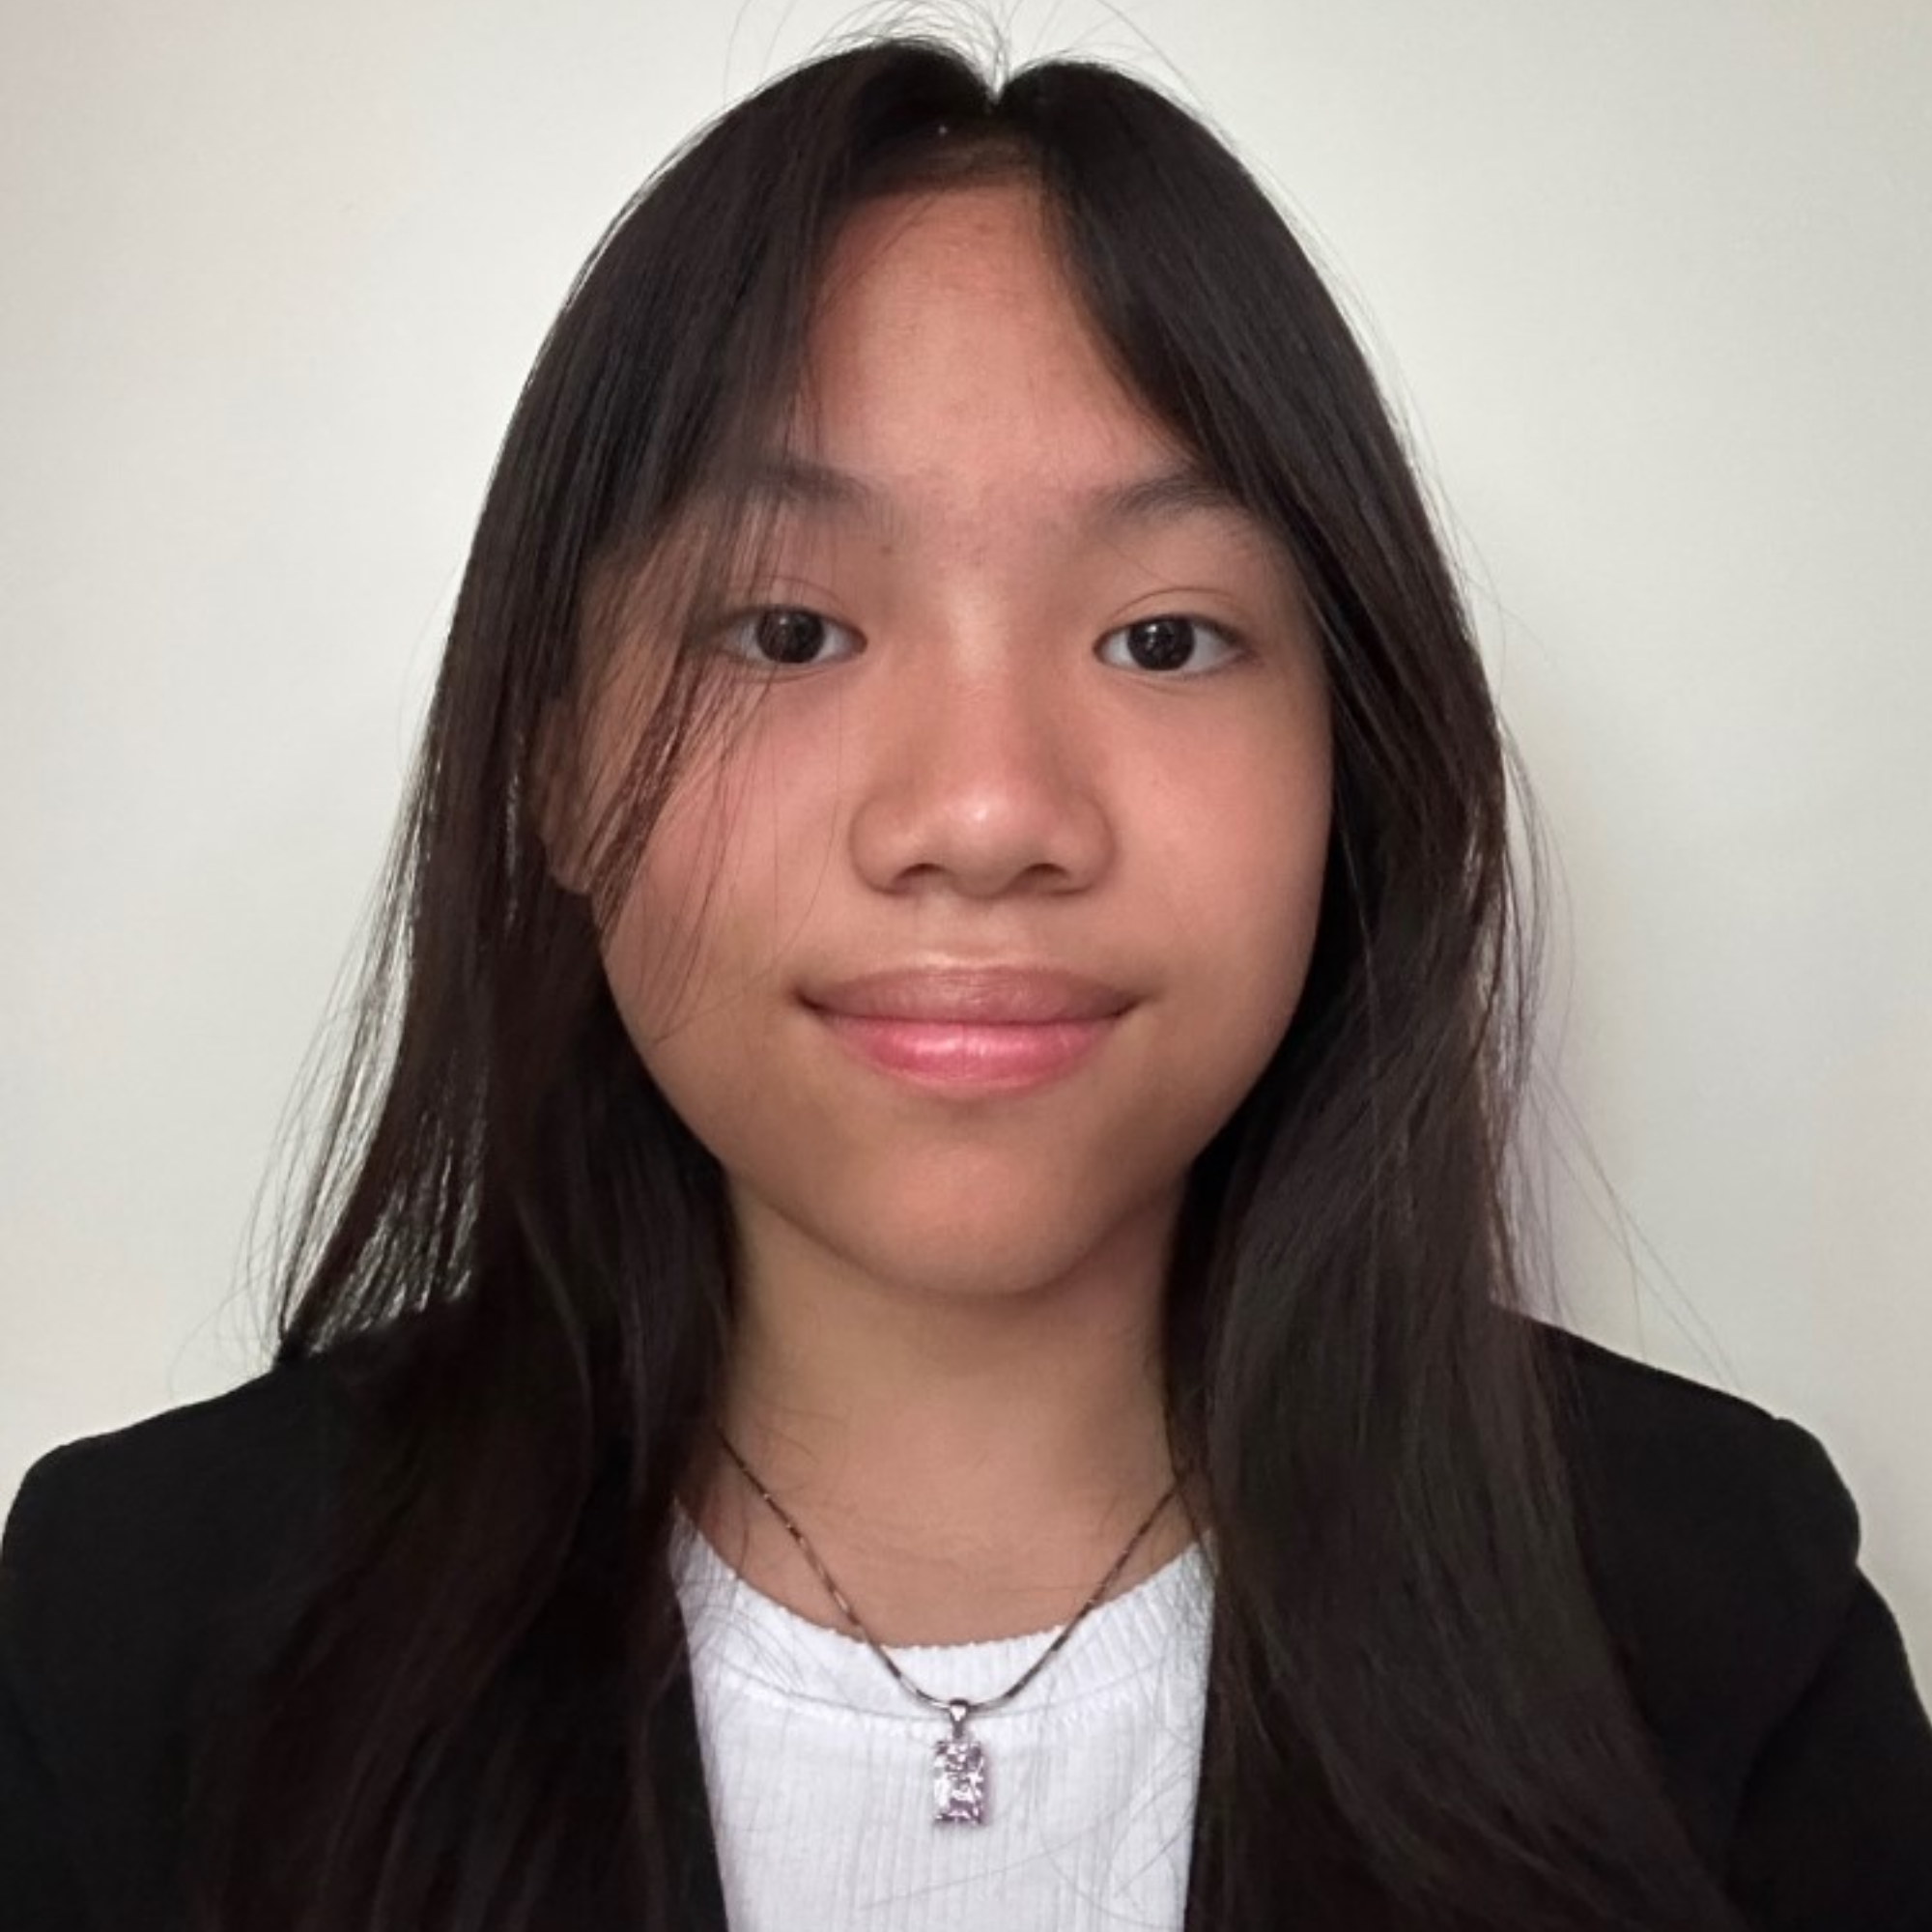 Commitee Chair Olivia Liang